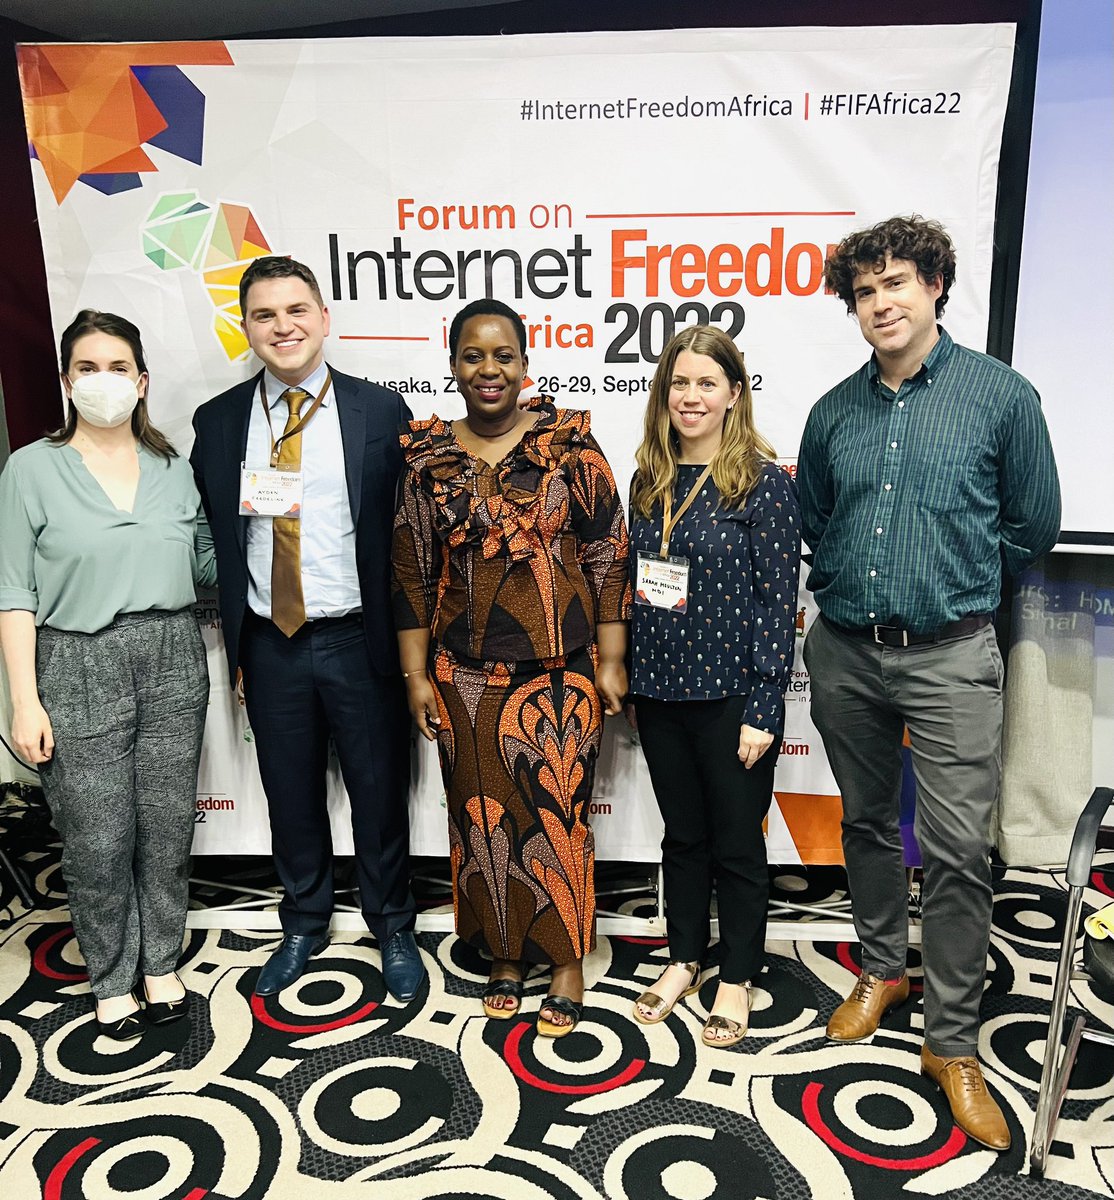 As a Member of Parliament in #Tanzania and Chair of the African Parliamentary Network on Internet Governance #APNIG, I found the #FIFAfrica22 @NDI @NDItech session on the future of #netgov to be pivotal for strengthening #digitalrights #netdemocracy and our role as MPs is central